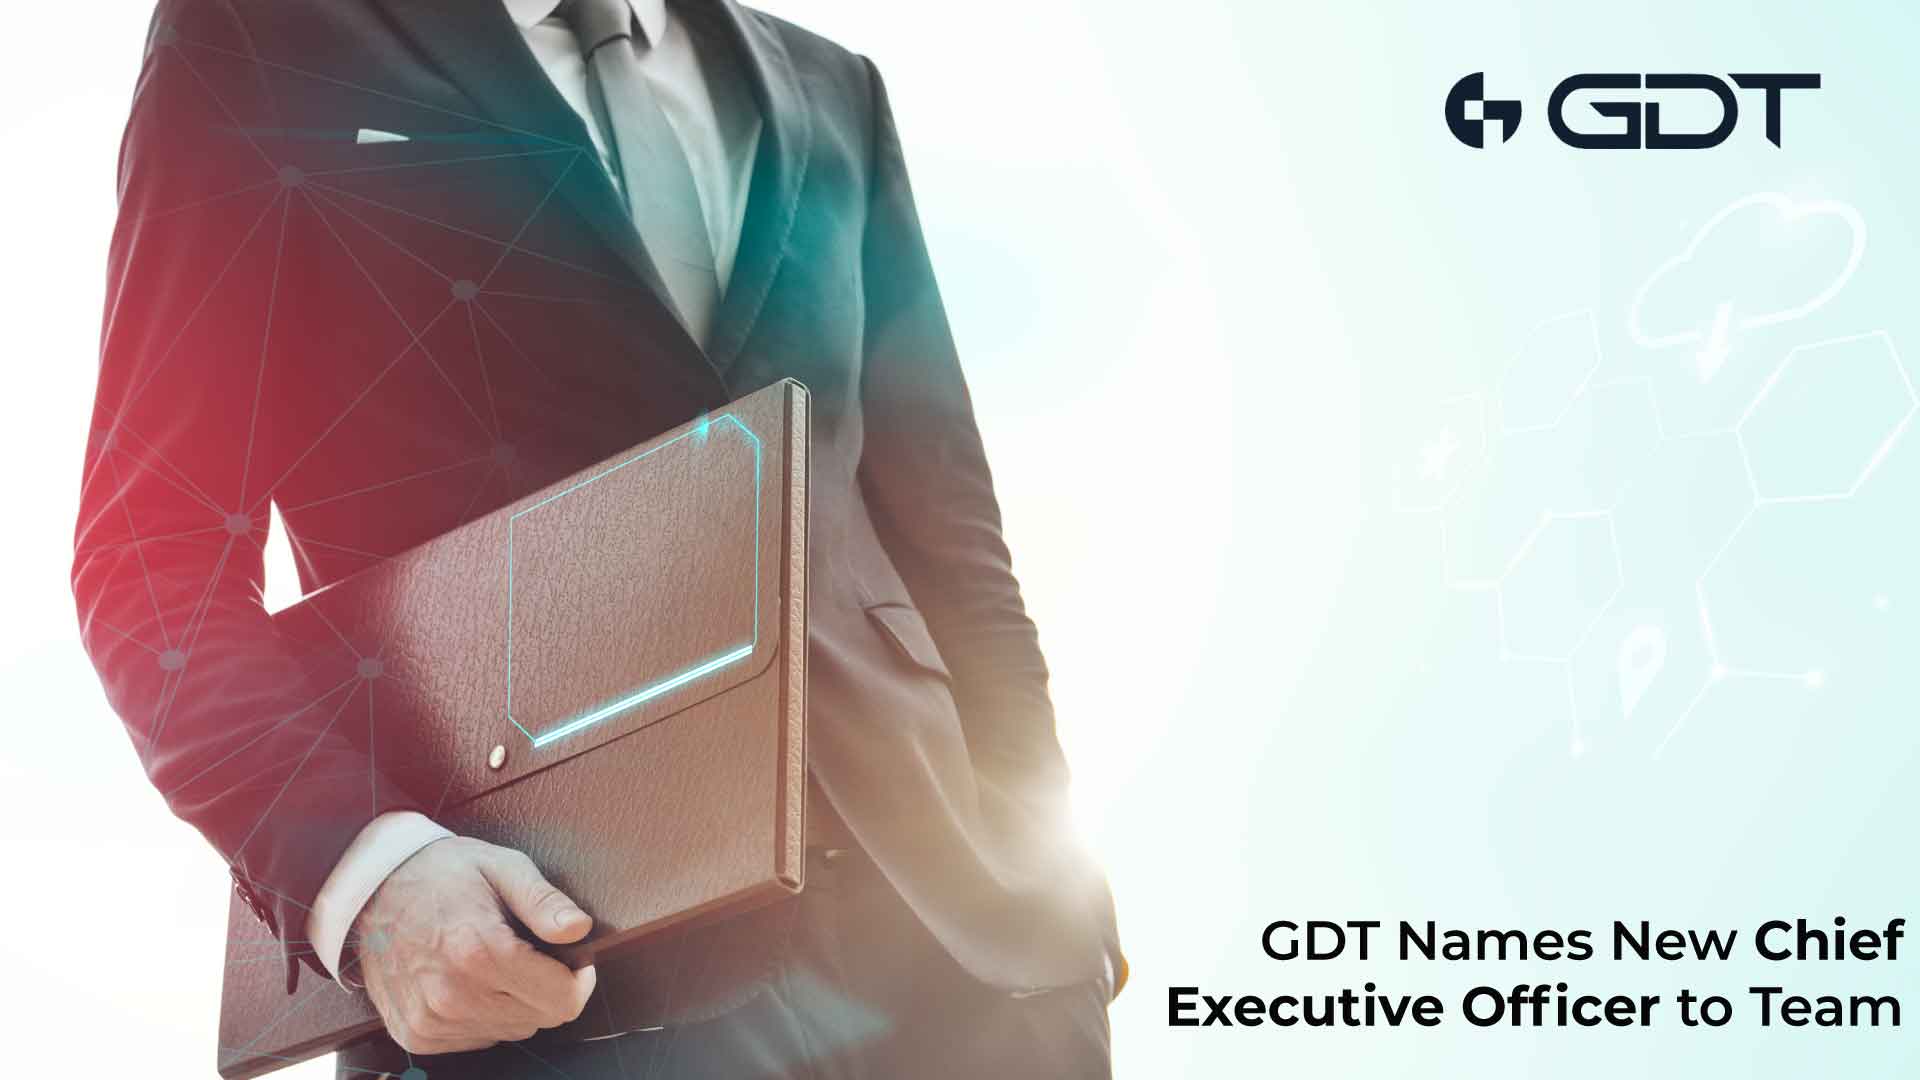 GDT Names New Chief Executive Officer to Team